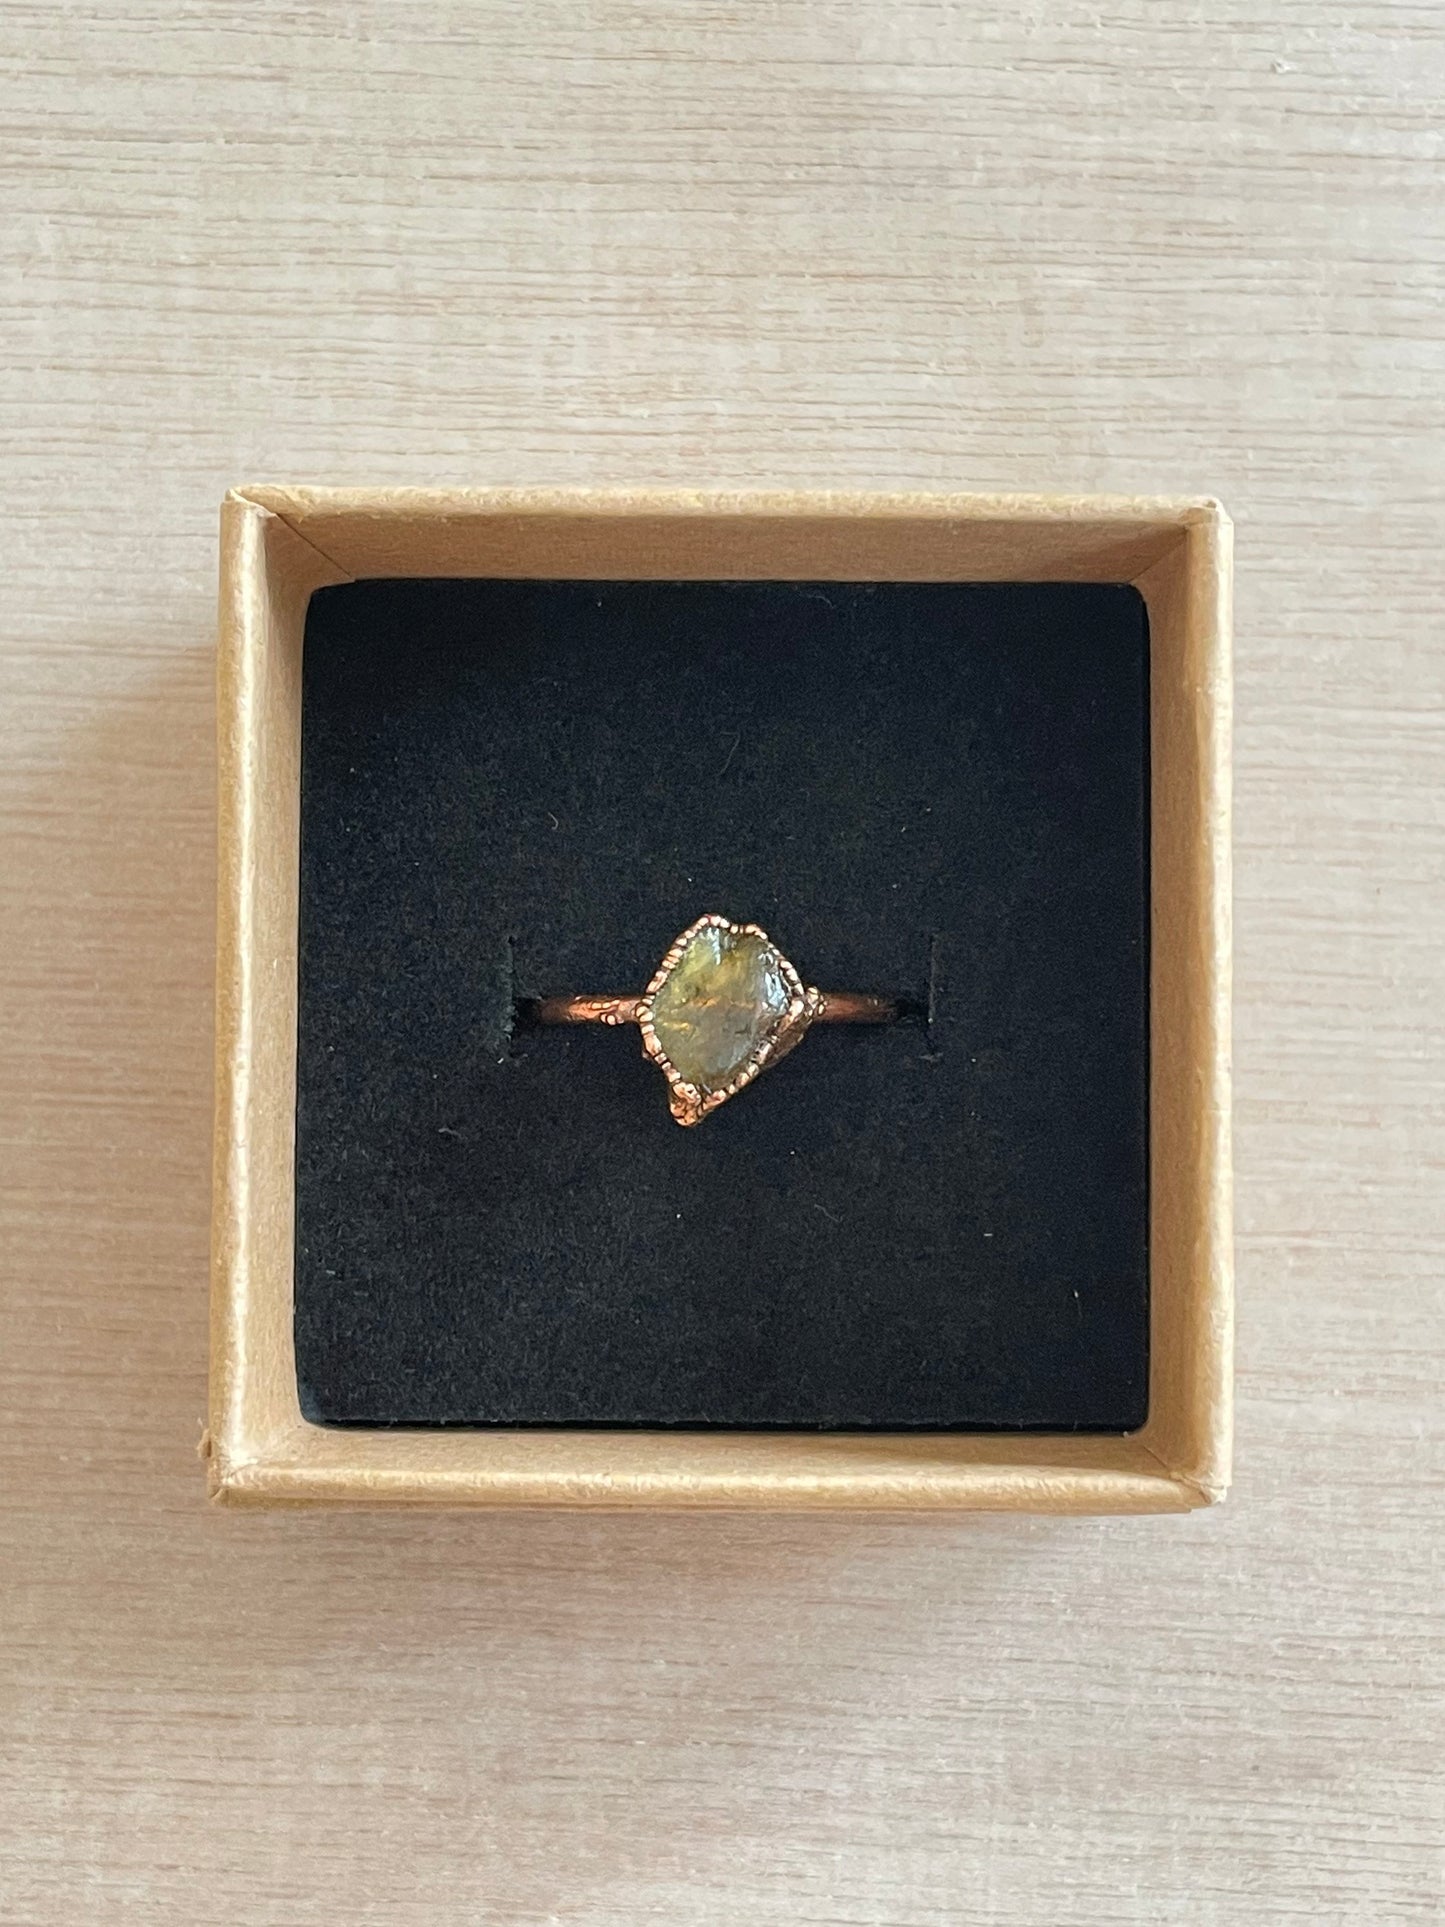 Amber Ring Size 5.25 